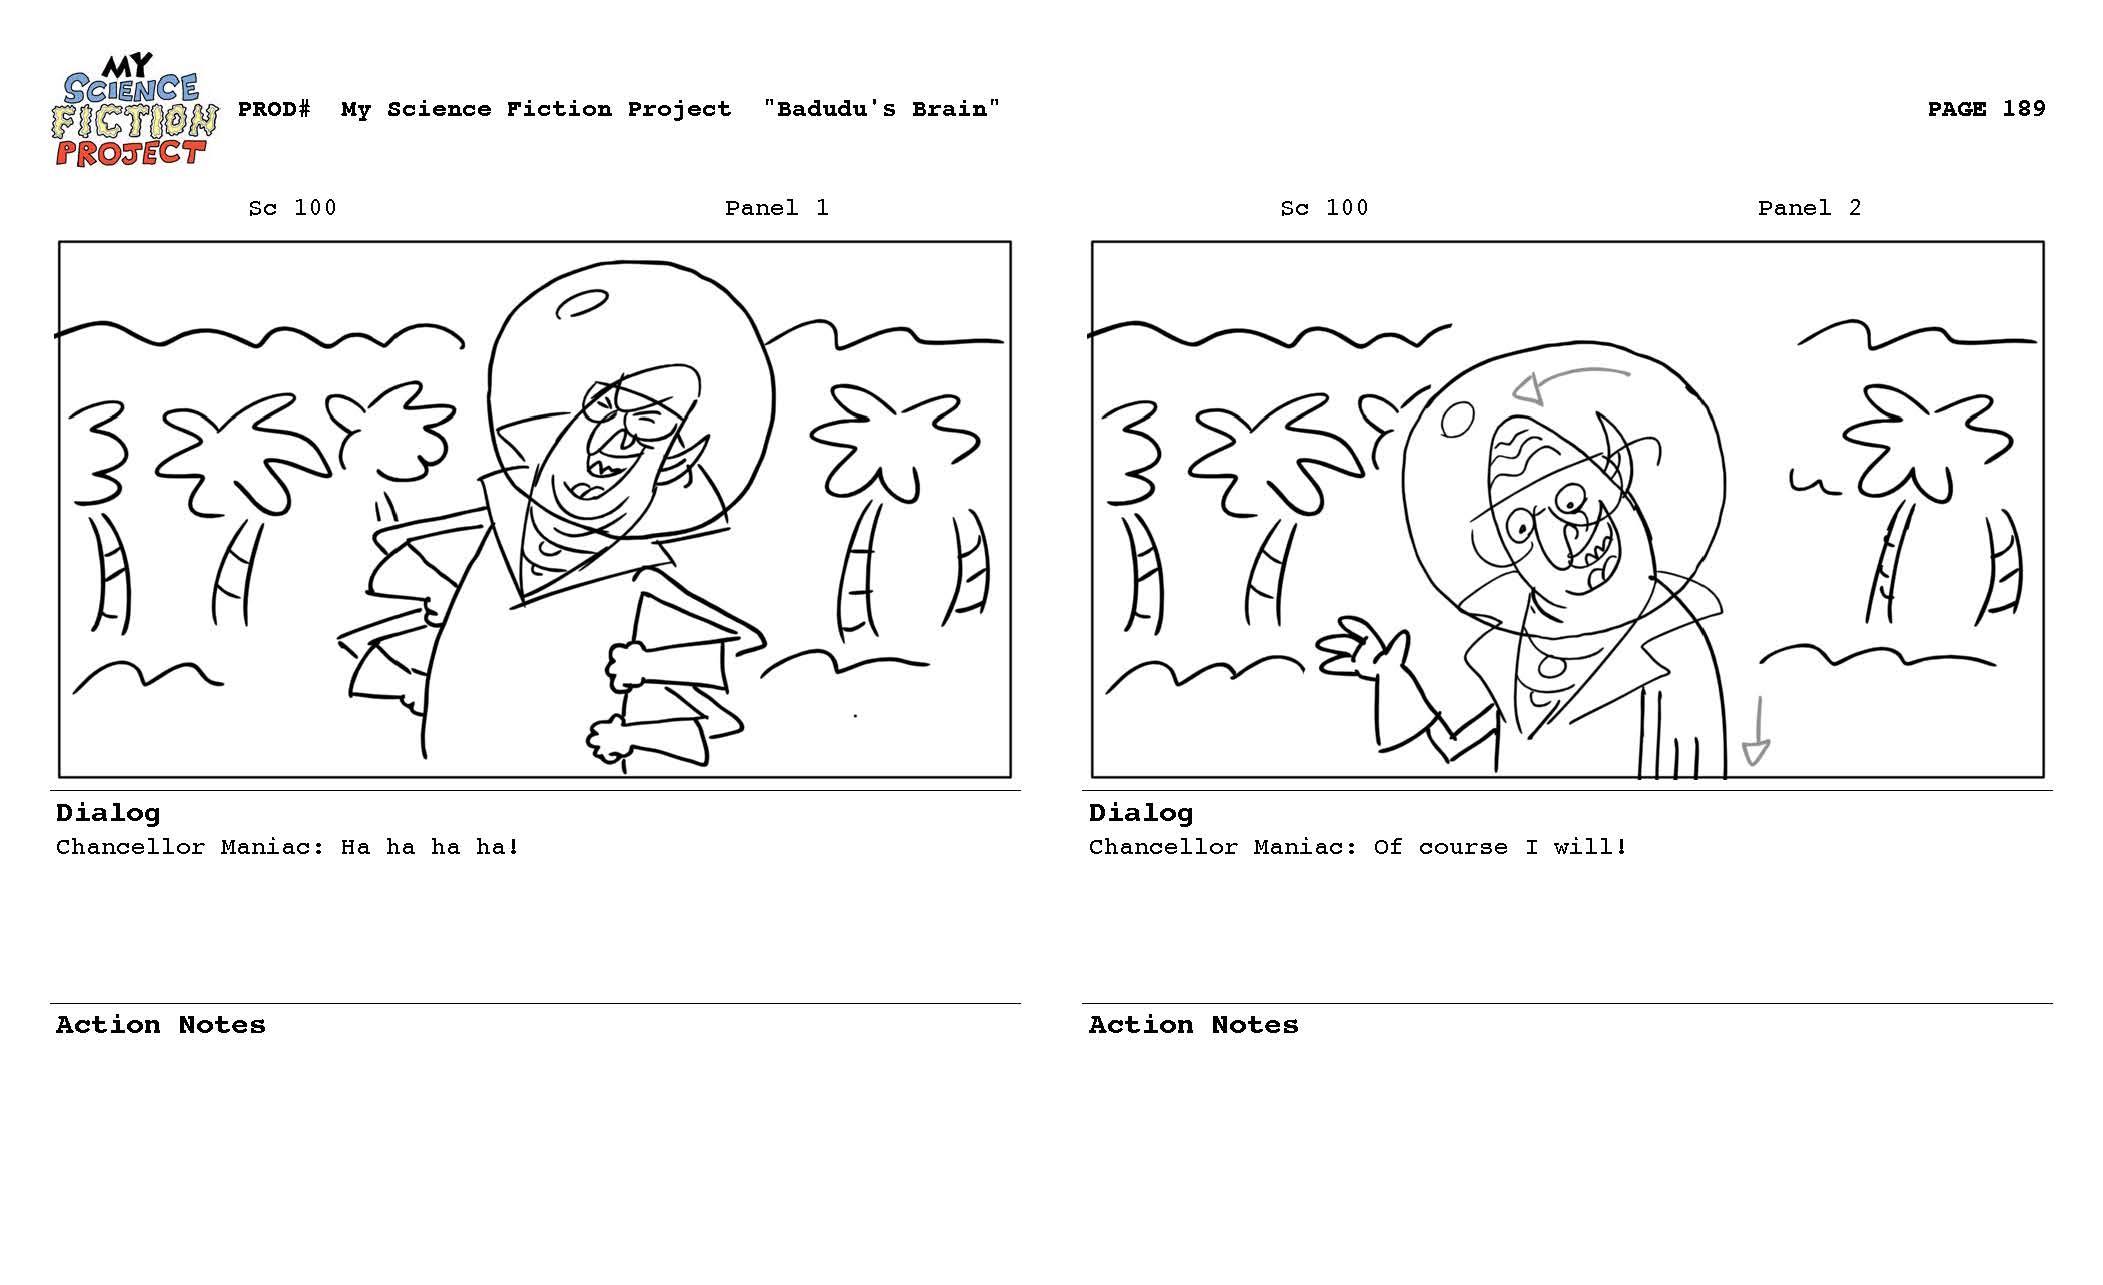 My_Science_Fiction_Project_SB_083112_reduced_Page_189.jpg